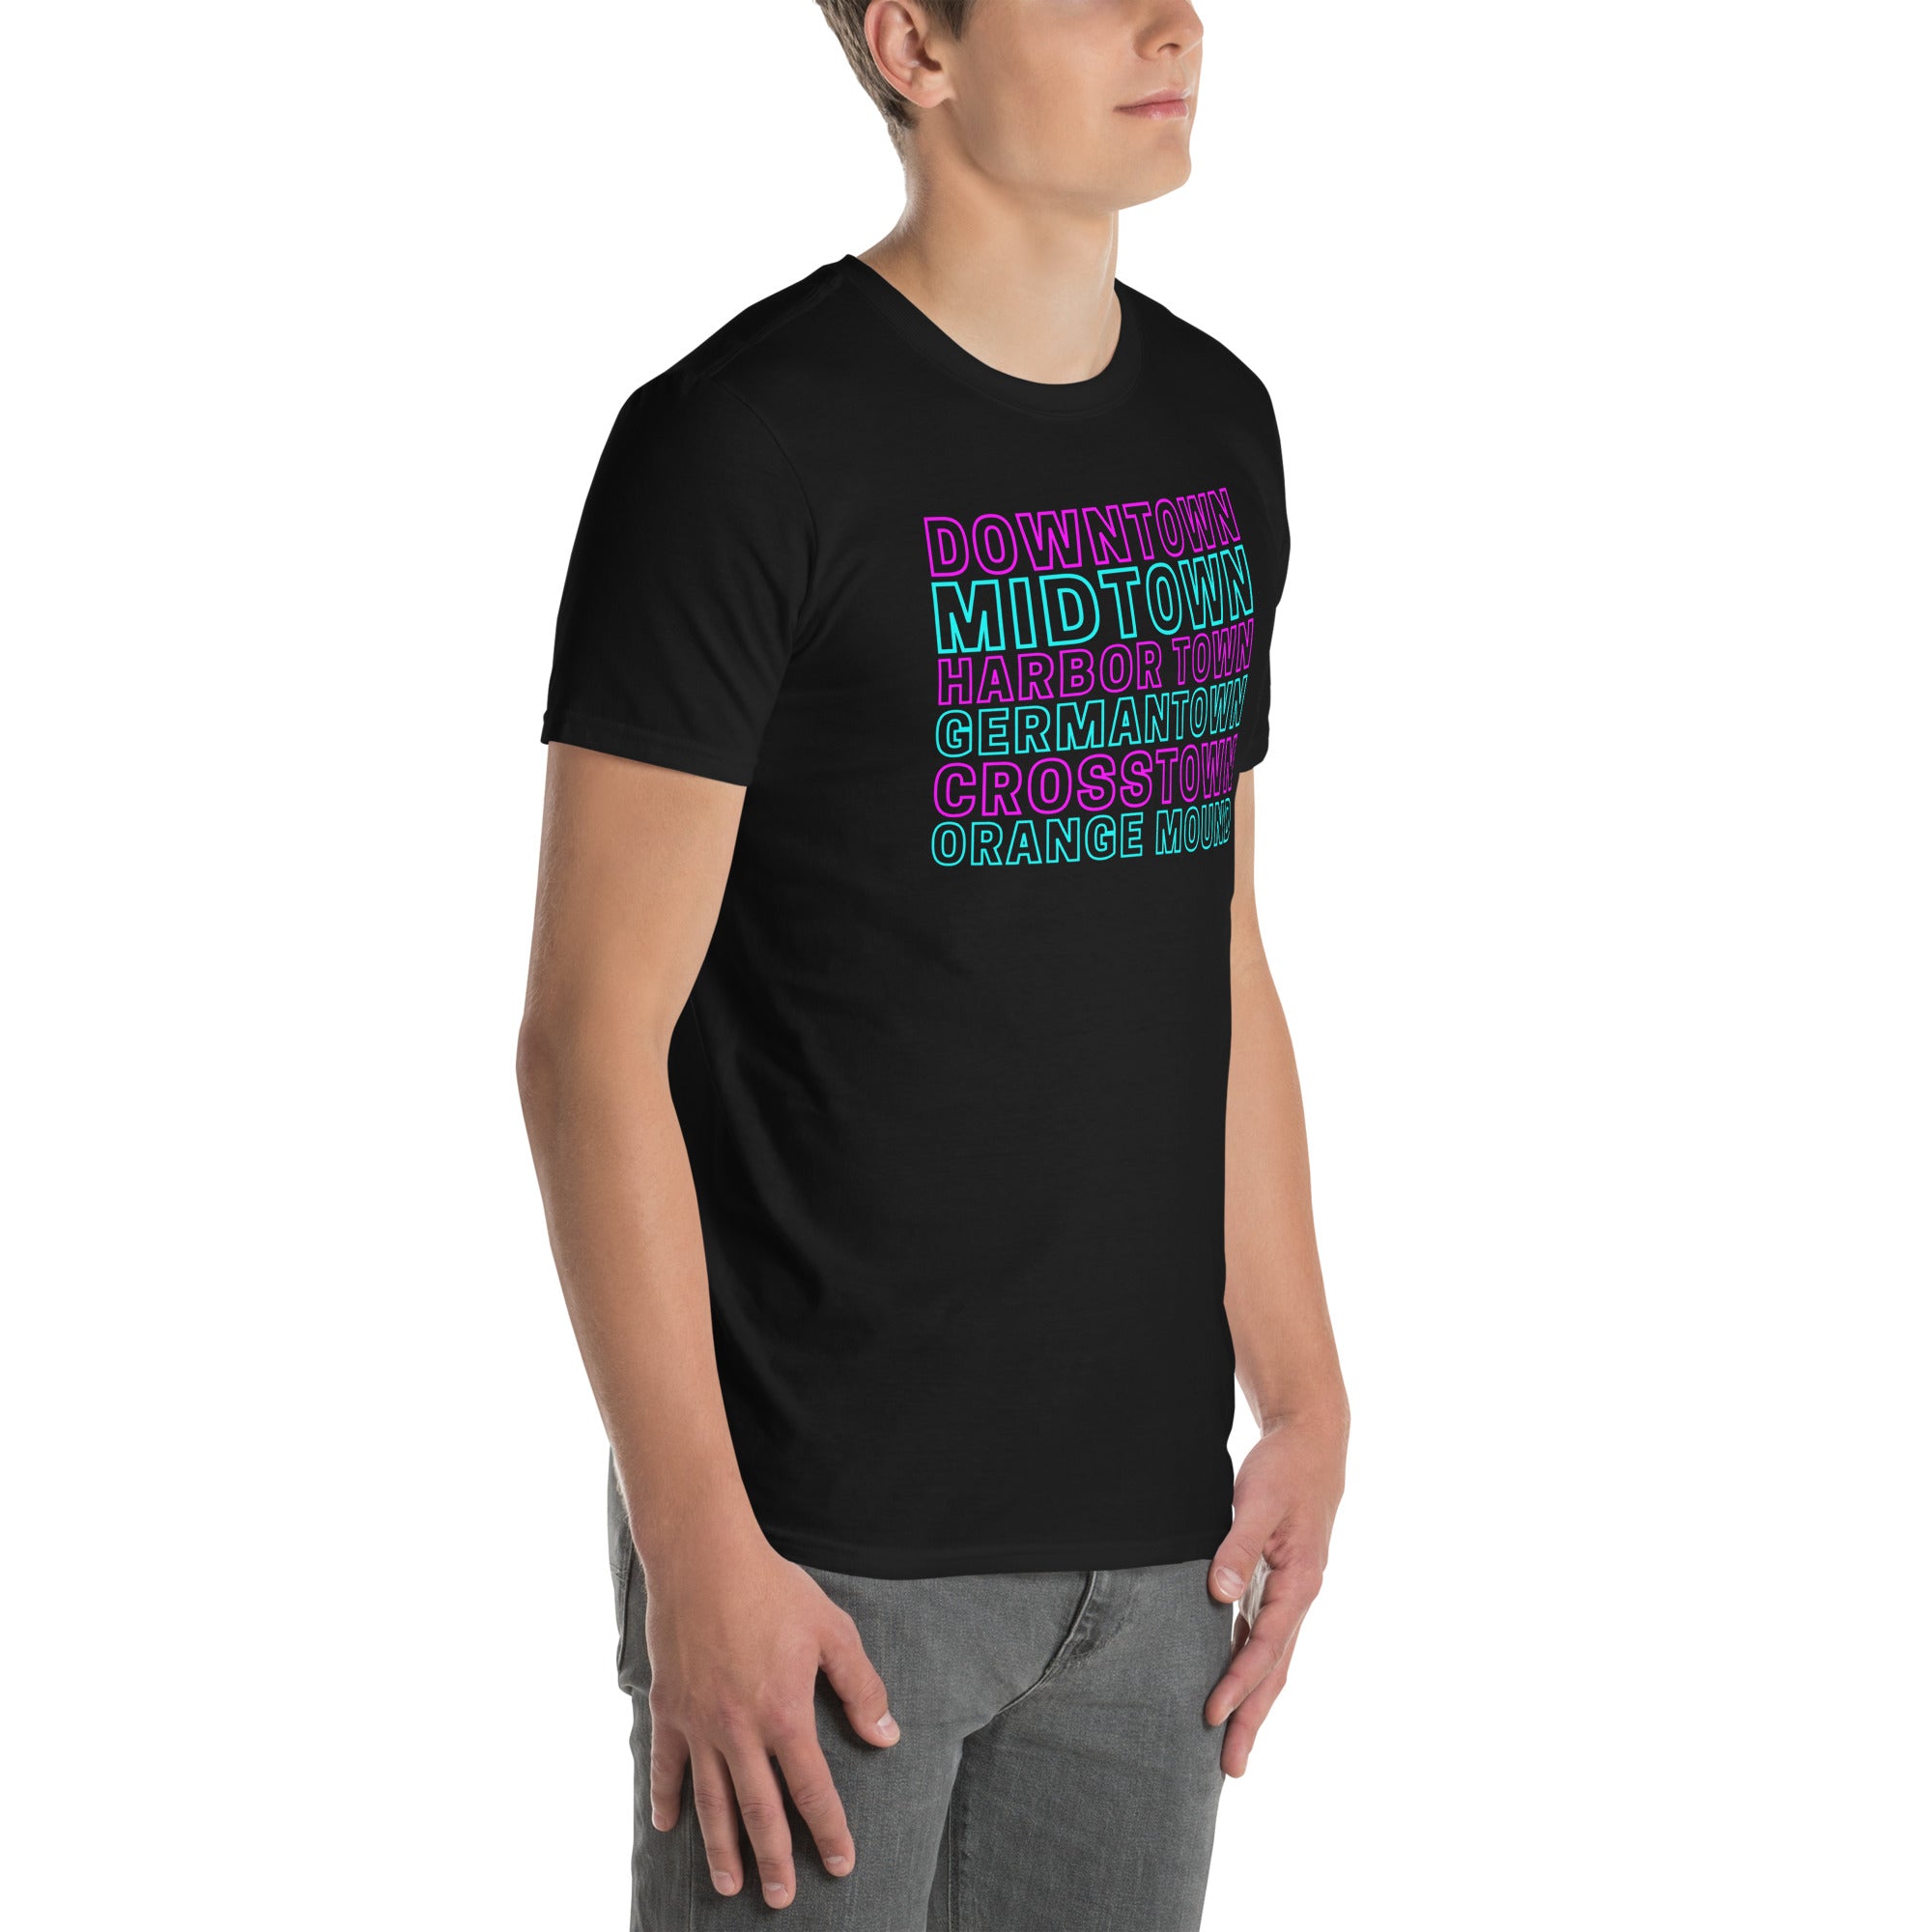 Towns and Mounds Short-Sleeve Unisex T-Shirt